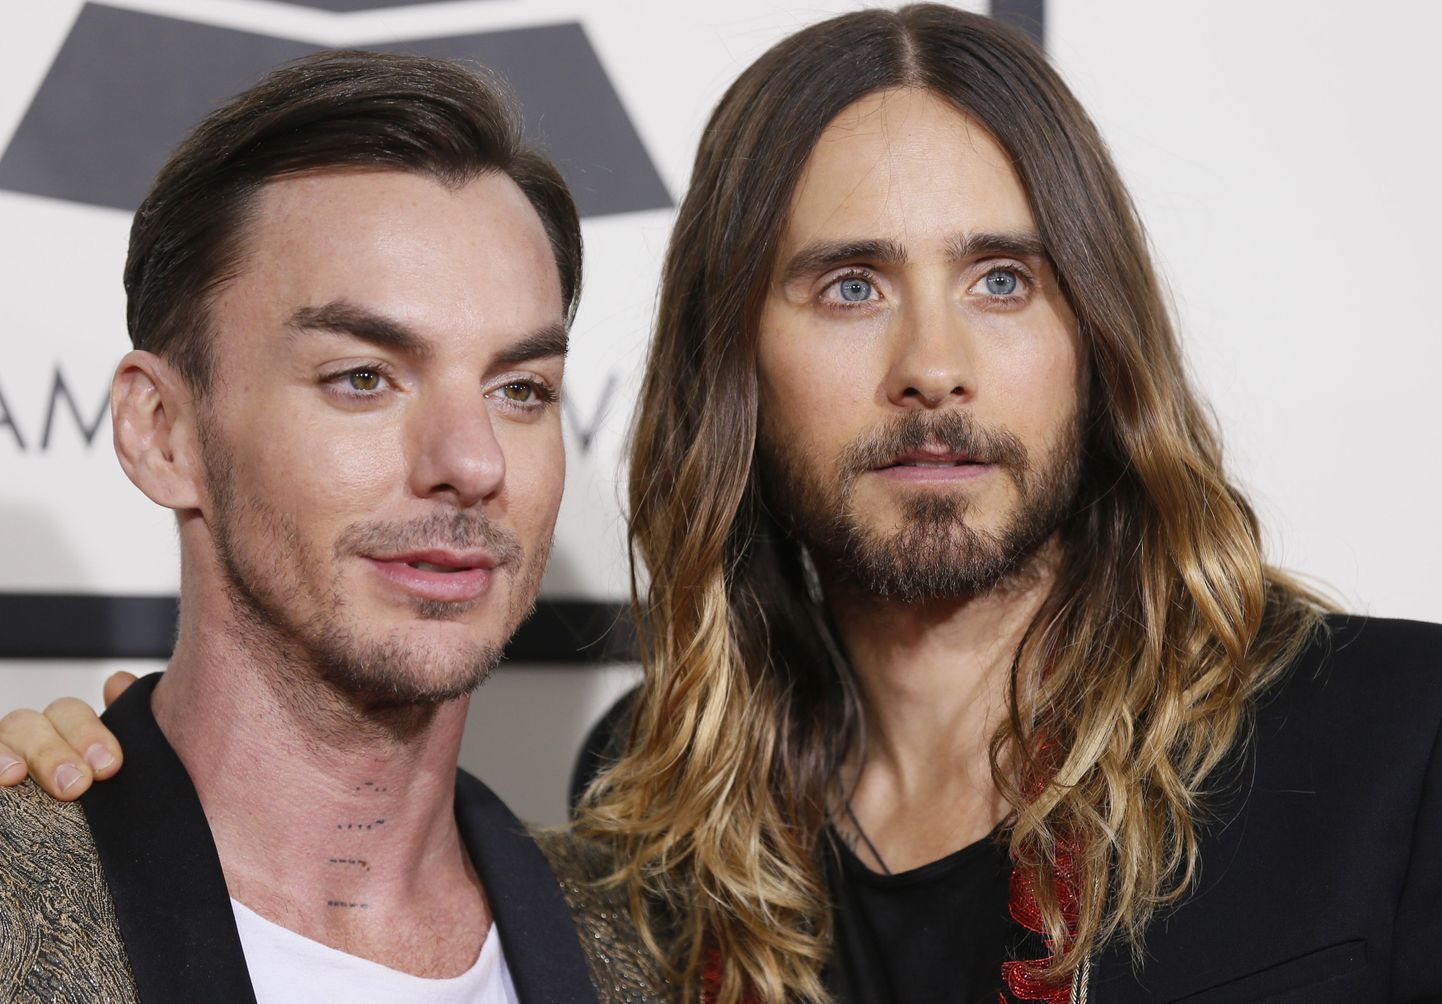 Rock band Thirty Seconds to Mars members Shannon Leto and Jared Leto (L-R) arrive at the 56th annual Grammy Awards in Los Angeles, California January 26, 2014.     REUTERS/Danny Moloshok (UNITED STATES TAGS: ENTERTAINMENT) (GRAMMYS-ARRIVALS)